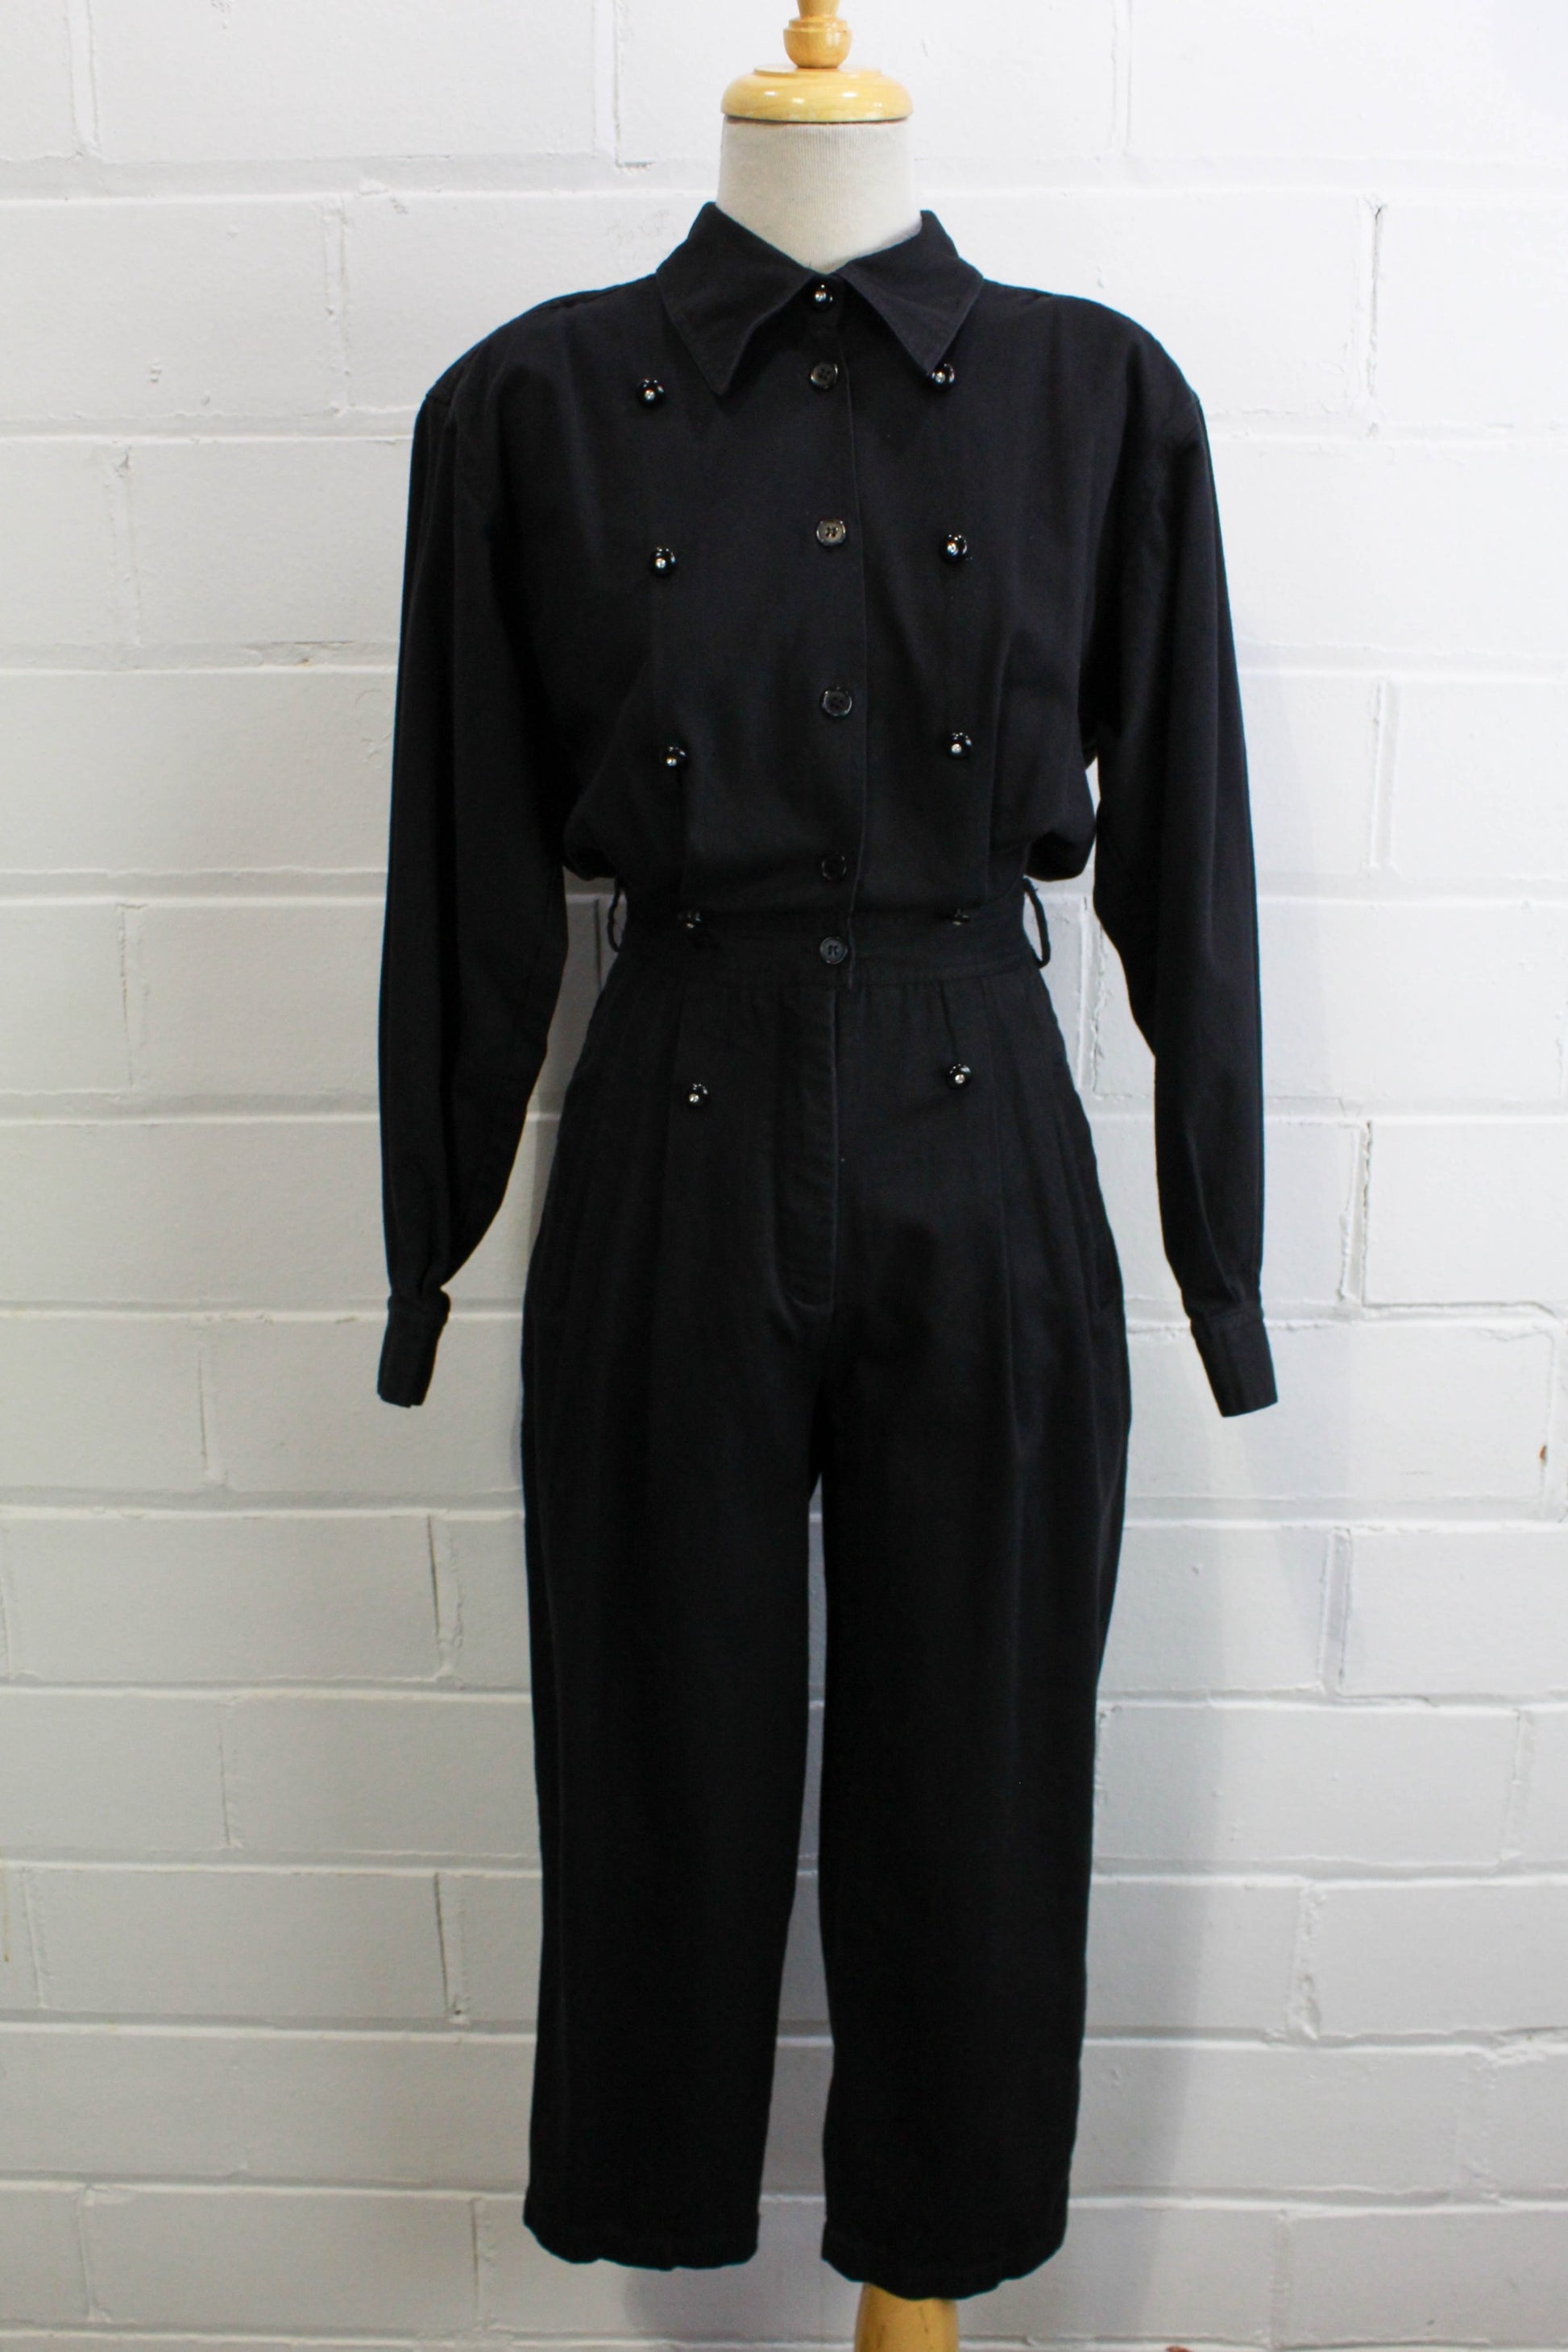 1980s womens jumpsuit black cotton with bib front, collar button up